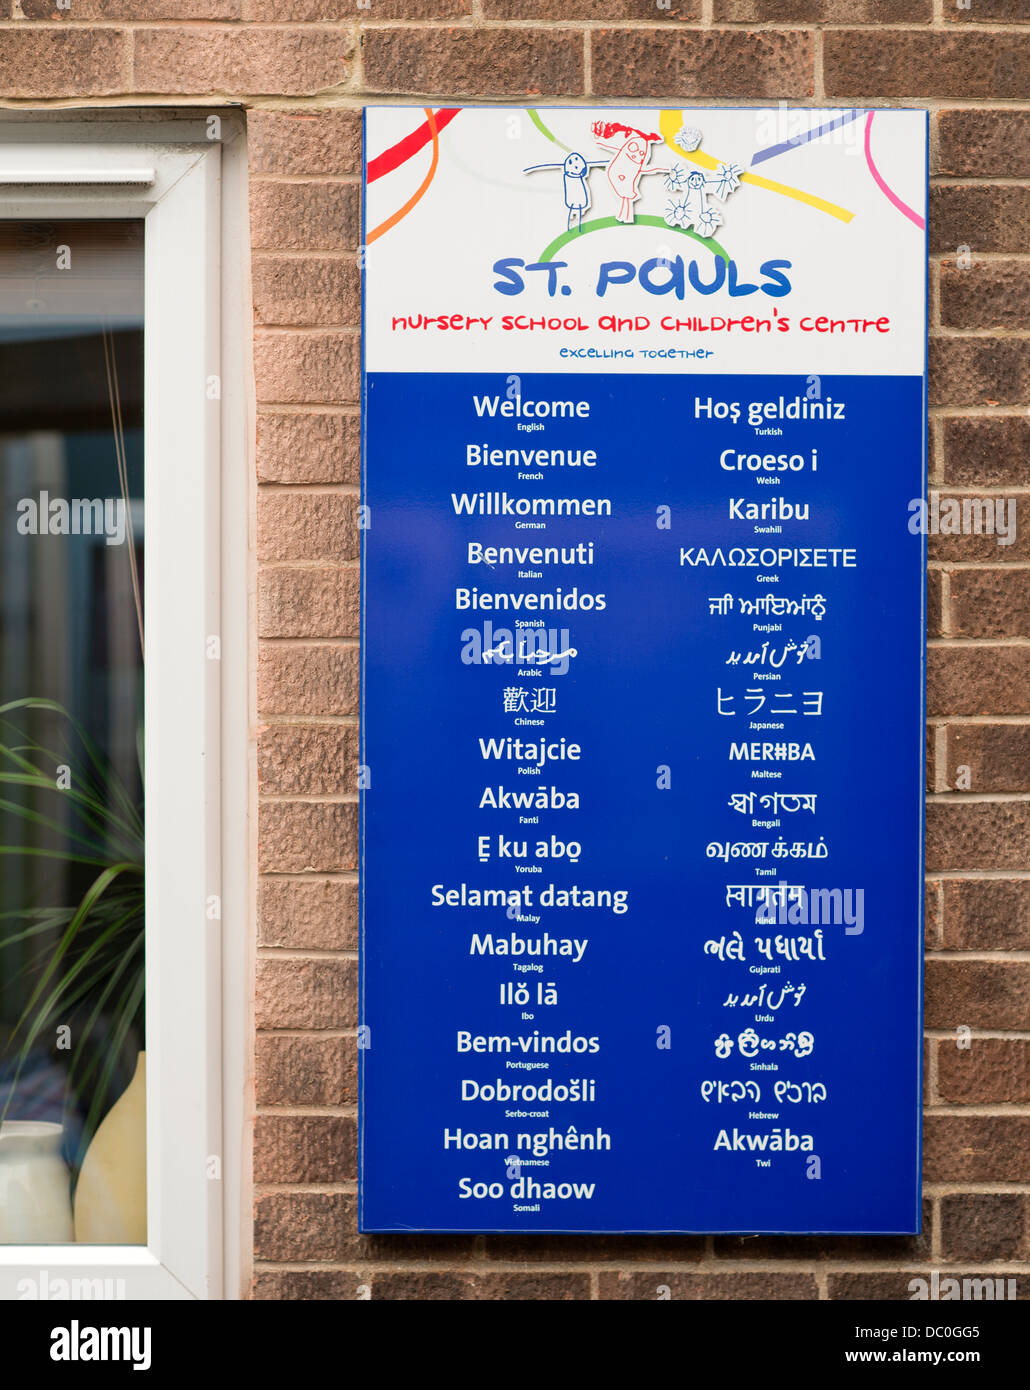 St. Pauls Nursery School and Children's Centre, Bristol UK 2013 - A welcome sign in thirty three different languages Stock Photo